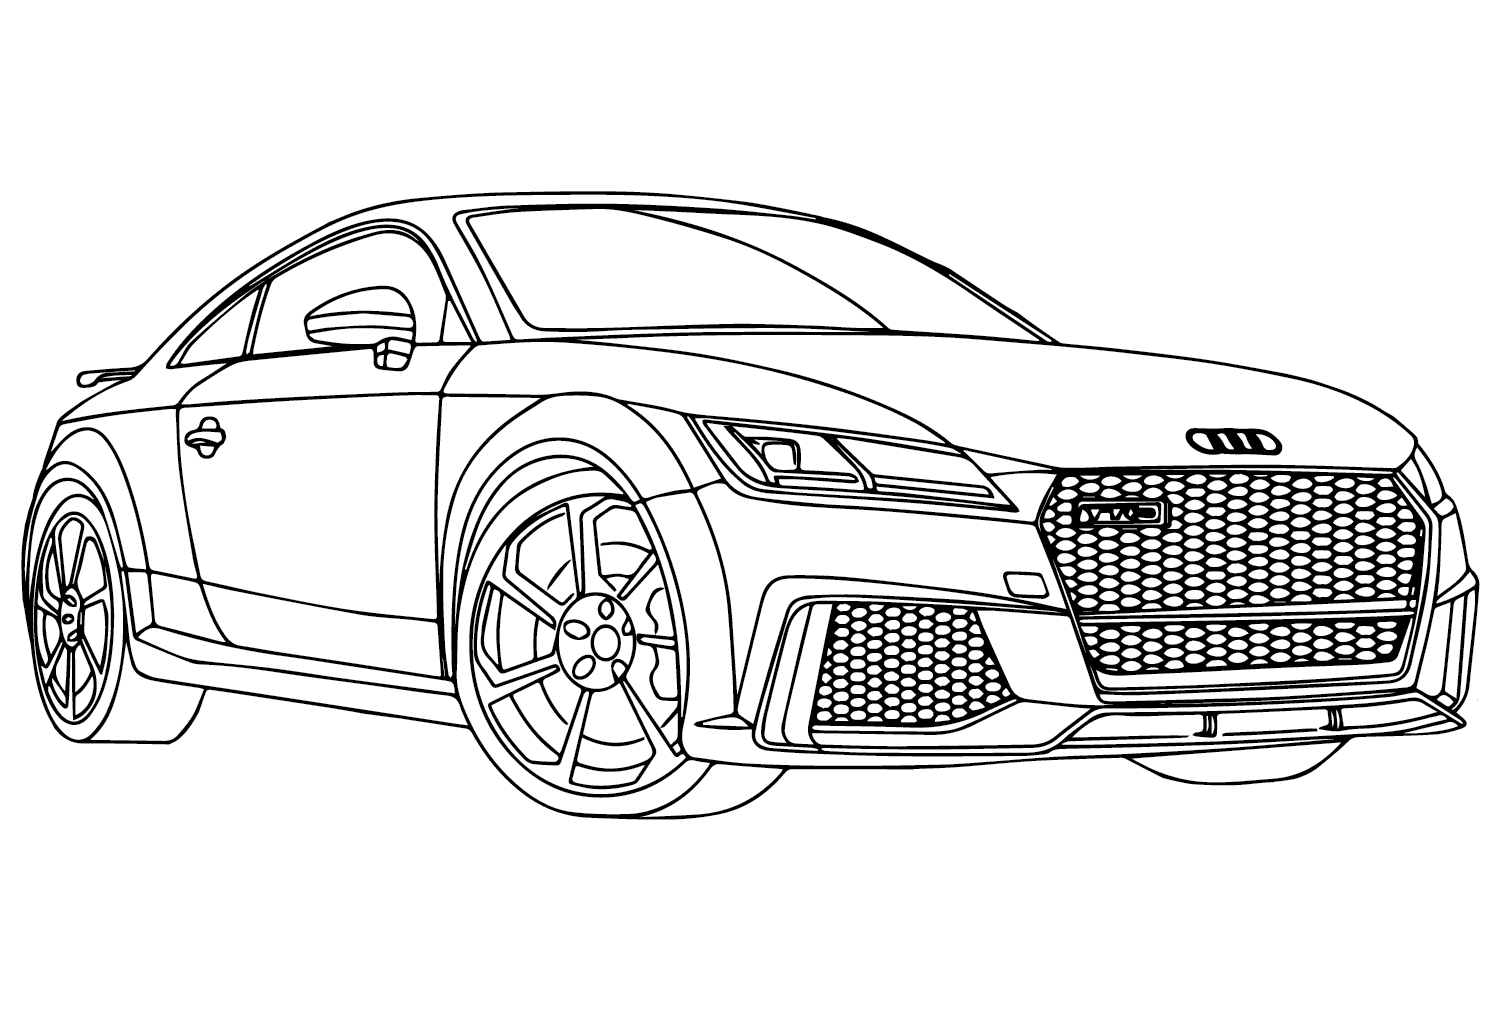 Audi TT Color Page Free from Audi